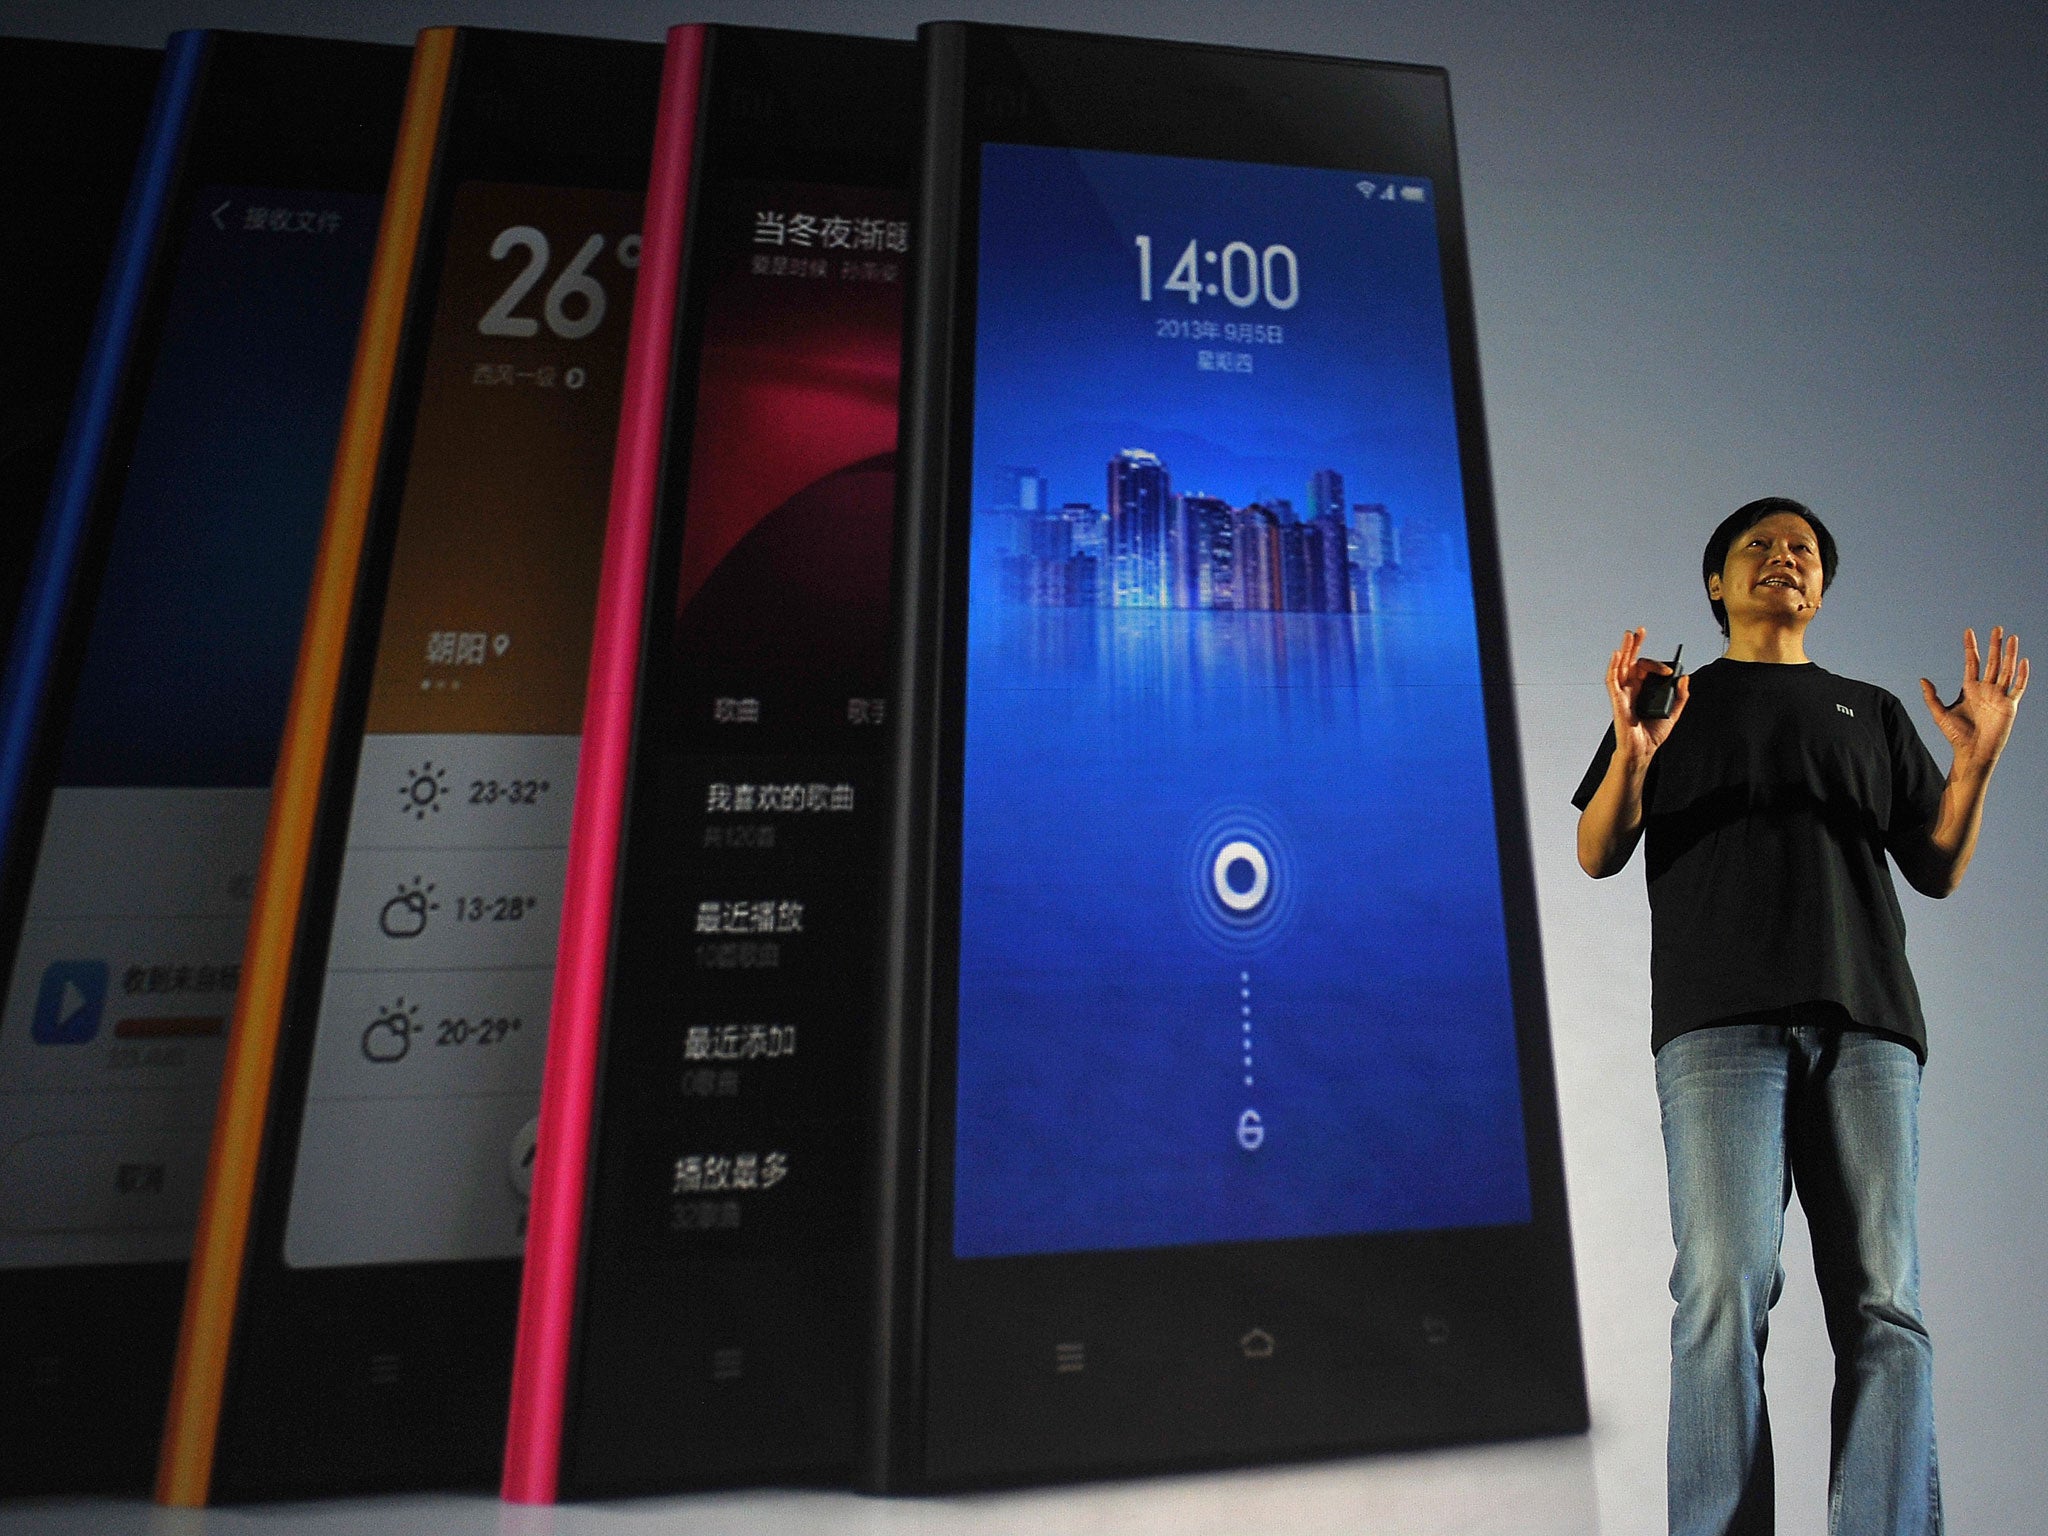 In China smartphone maker Xiaomi ranks behind only Apple and Samsung